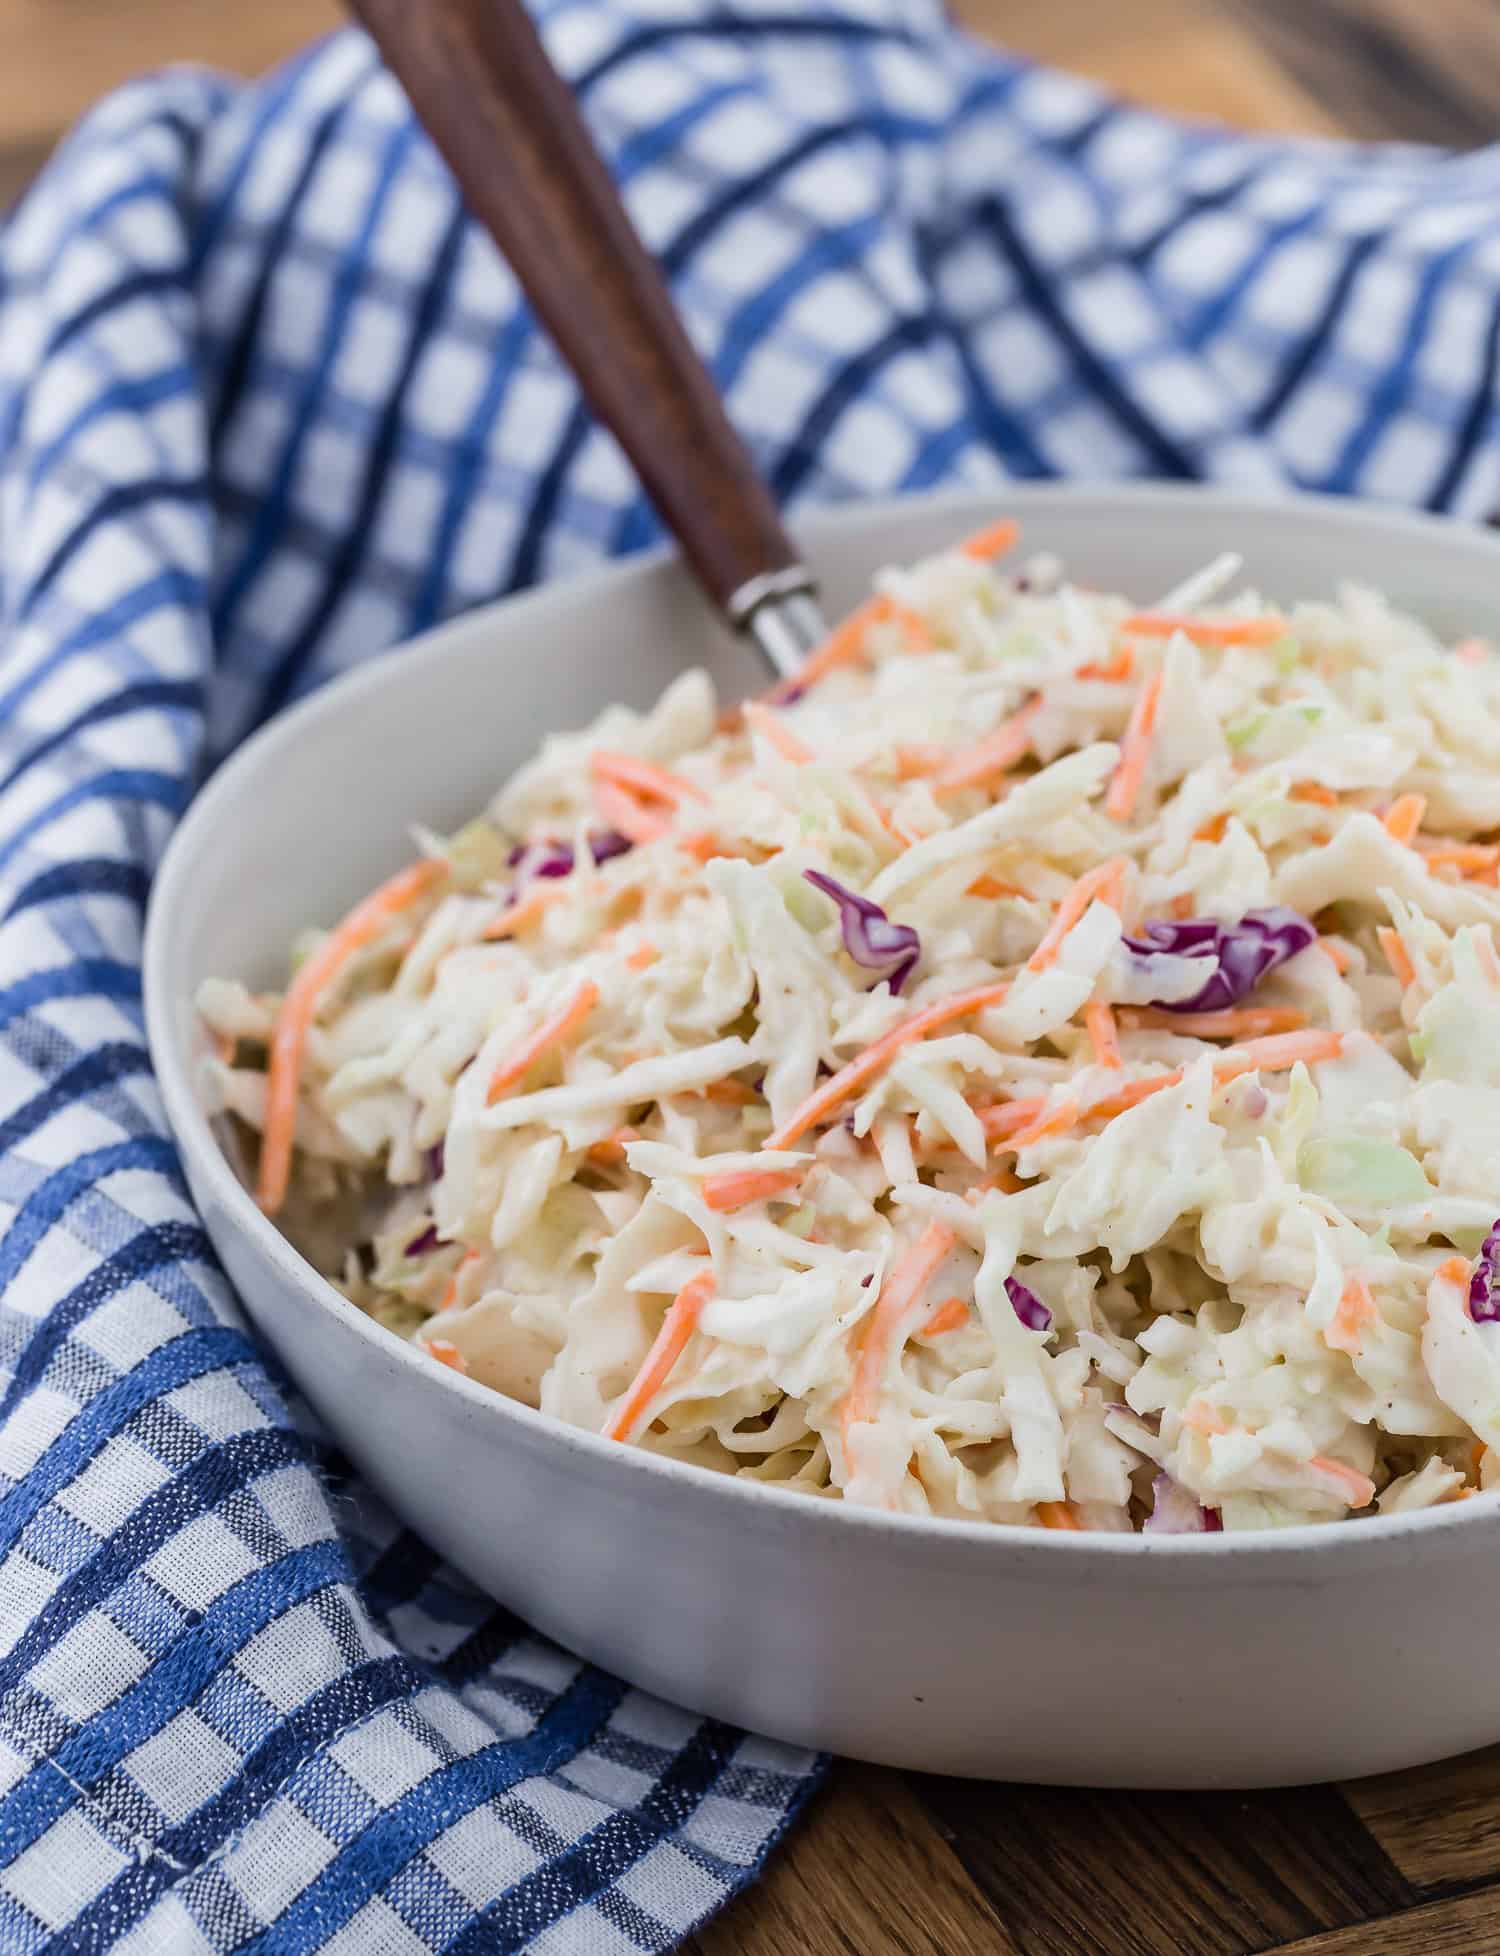 Creamy coleslaw in a bowl with wooden spoon.